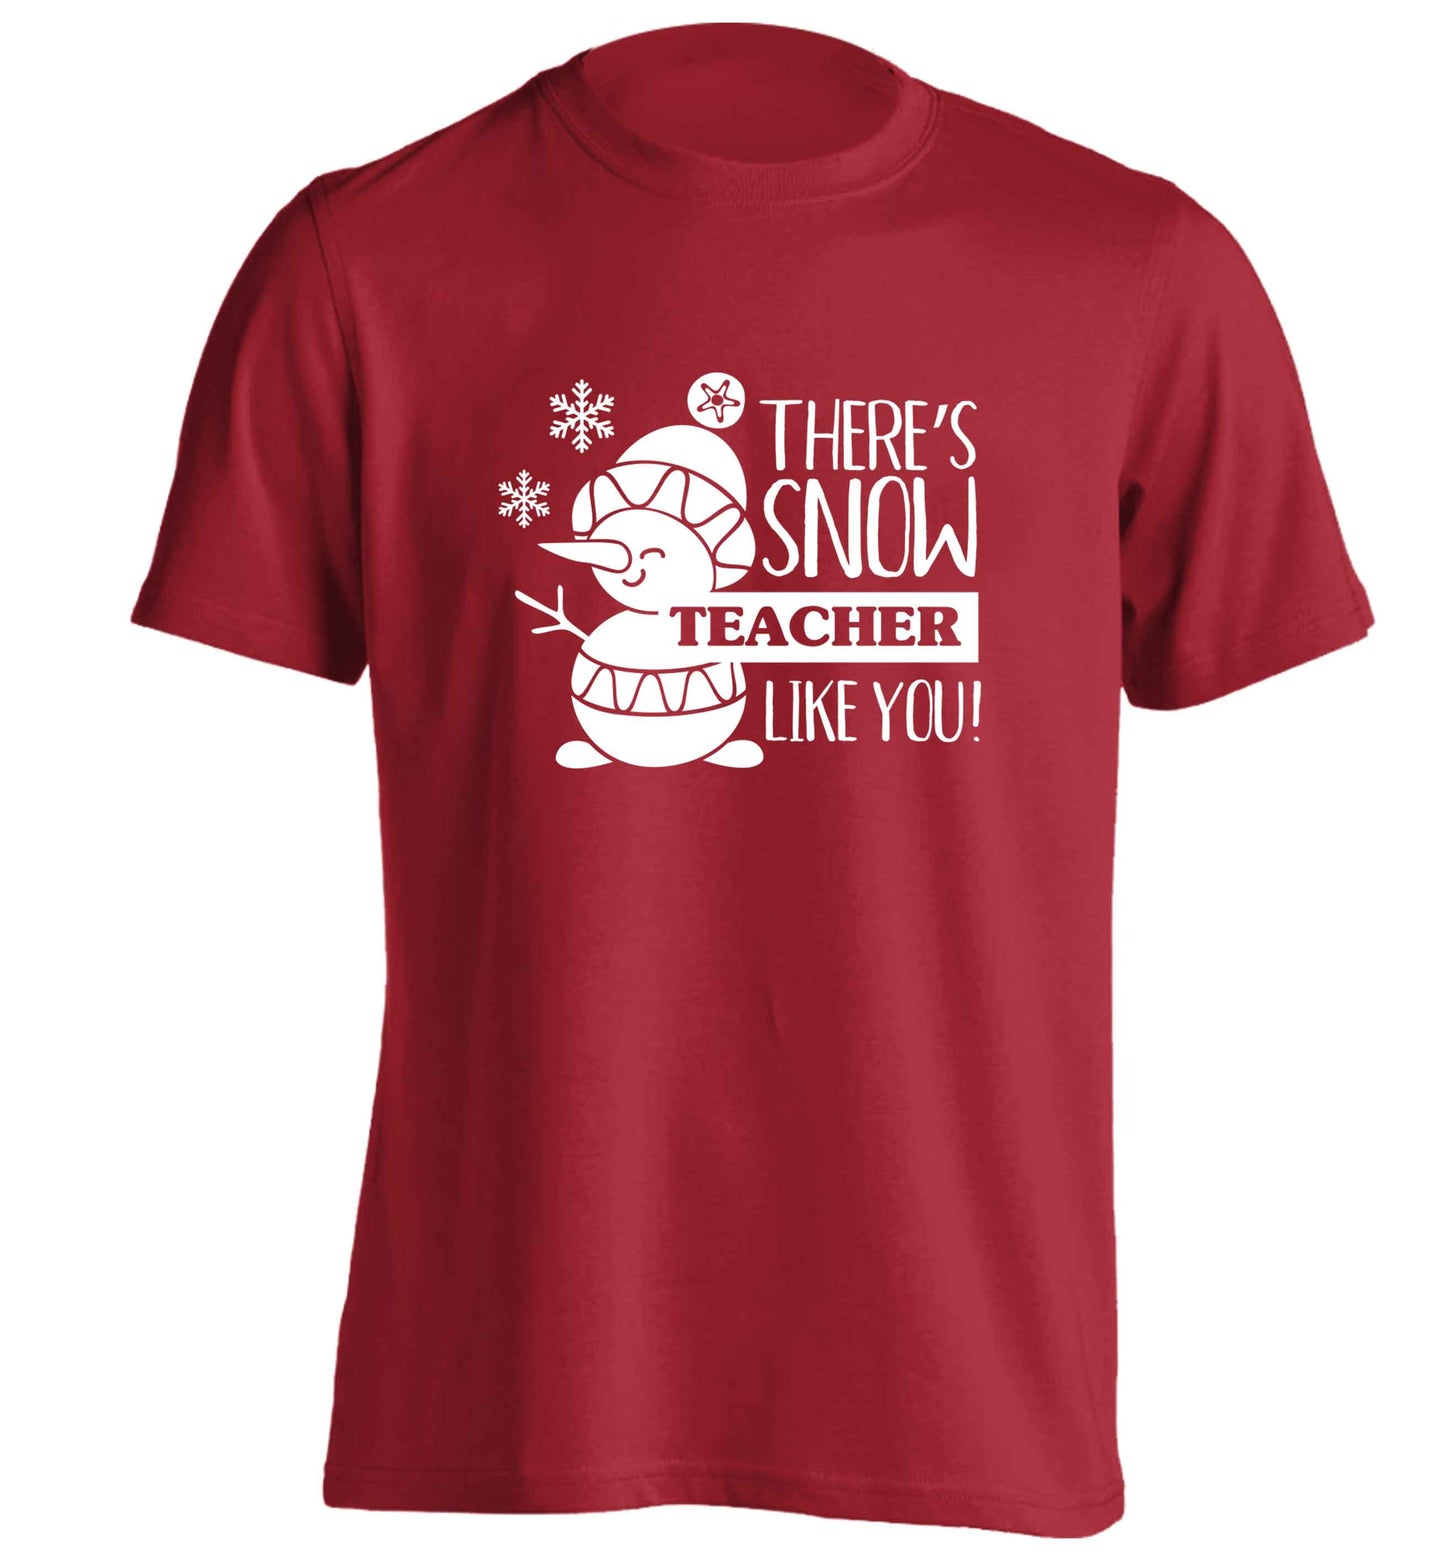 There's snow teacher like you adults unisex red Tshirt 2XL